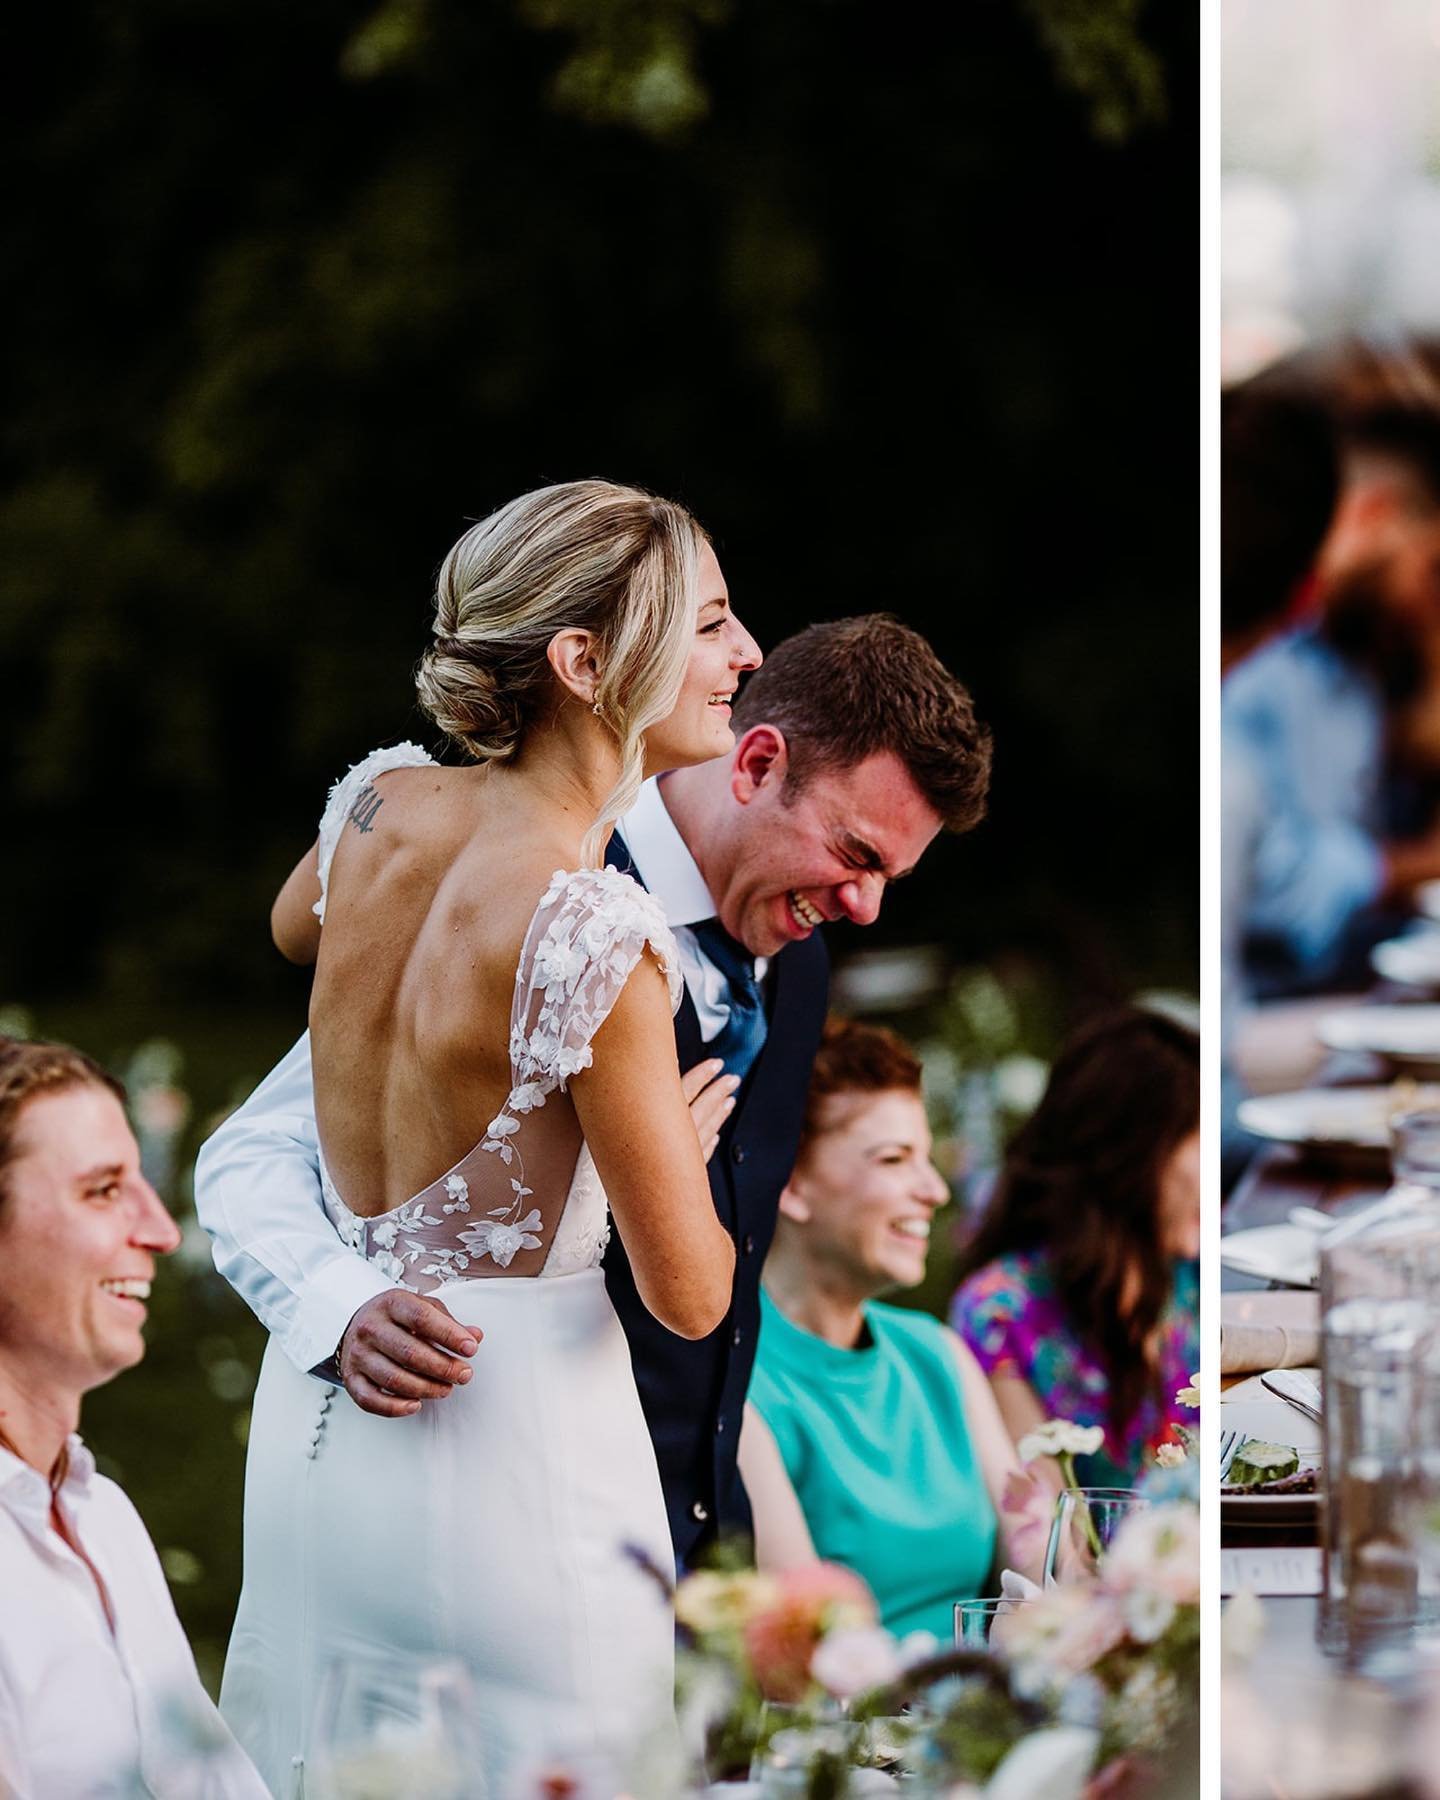 I realize this might not be for everyone, but I really LOVED having these two stand for their toasts! It gave such a fun perspective to this time and allowed for way more variety in how these moments can be captured! Just something to consider 😁
.
.